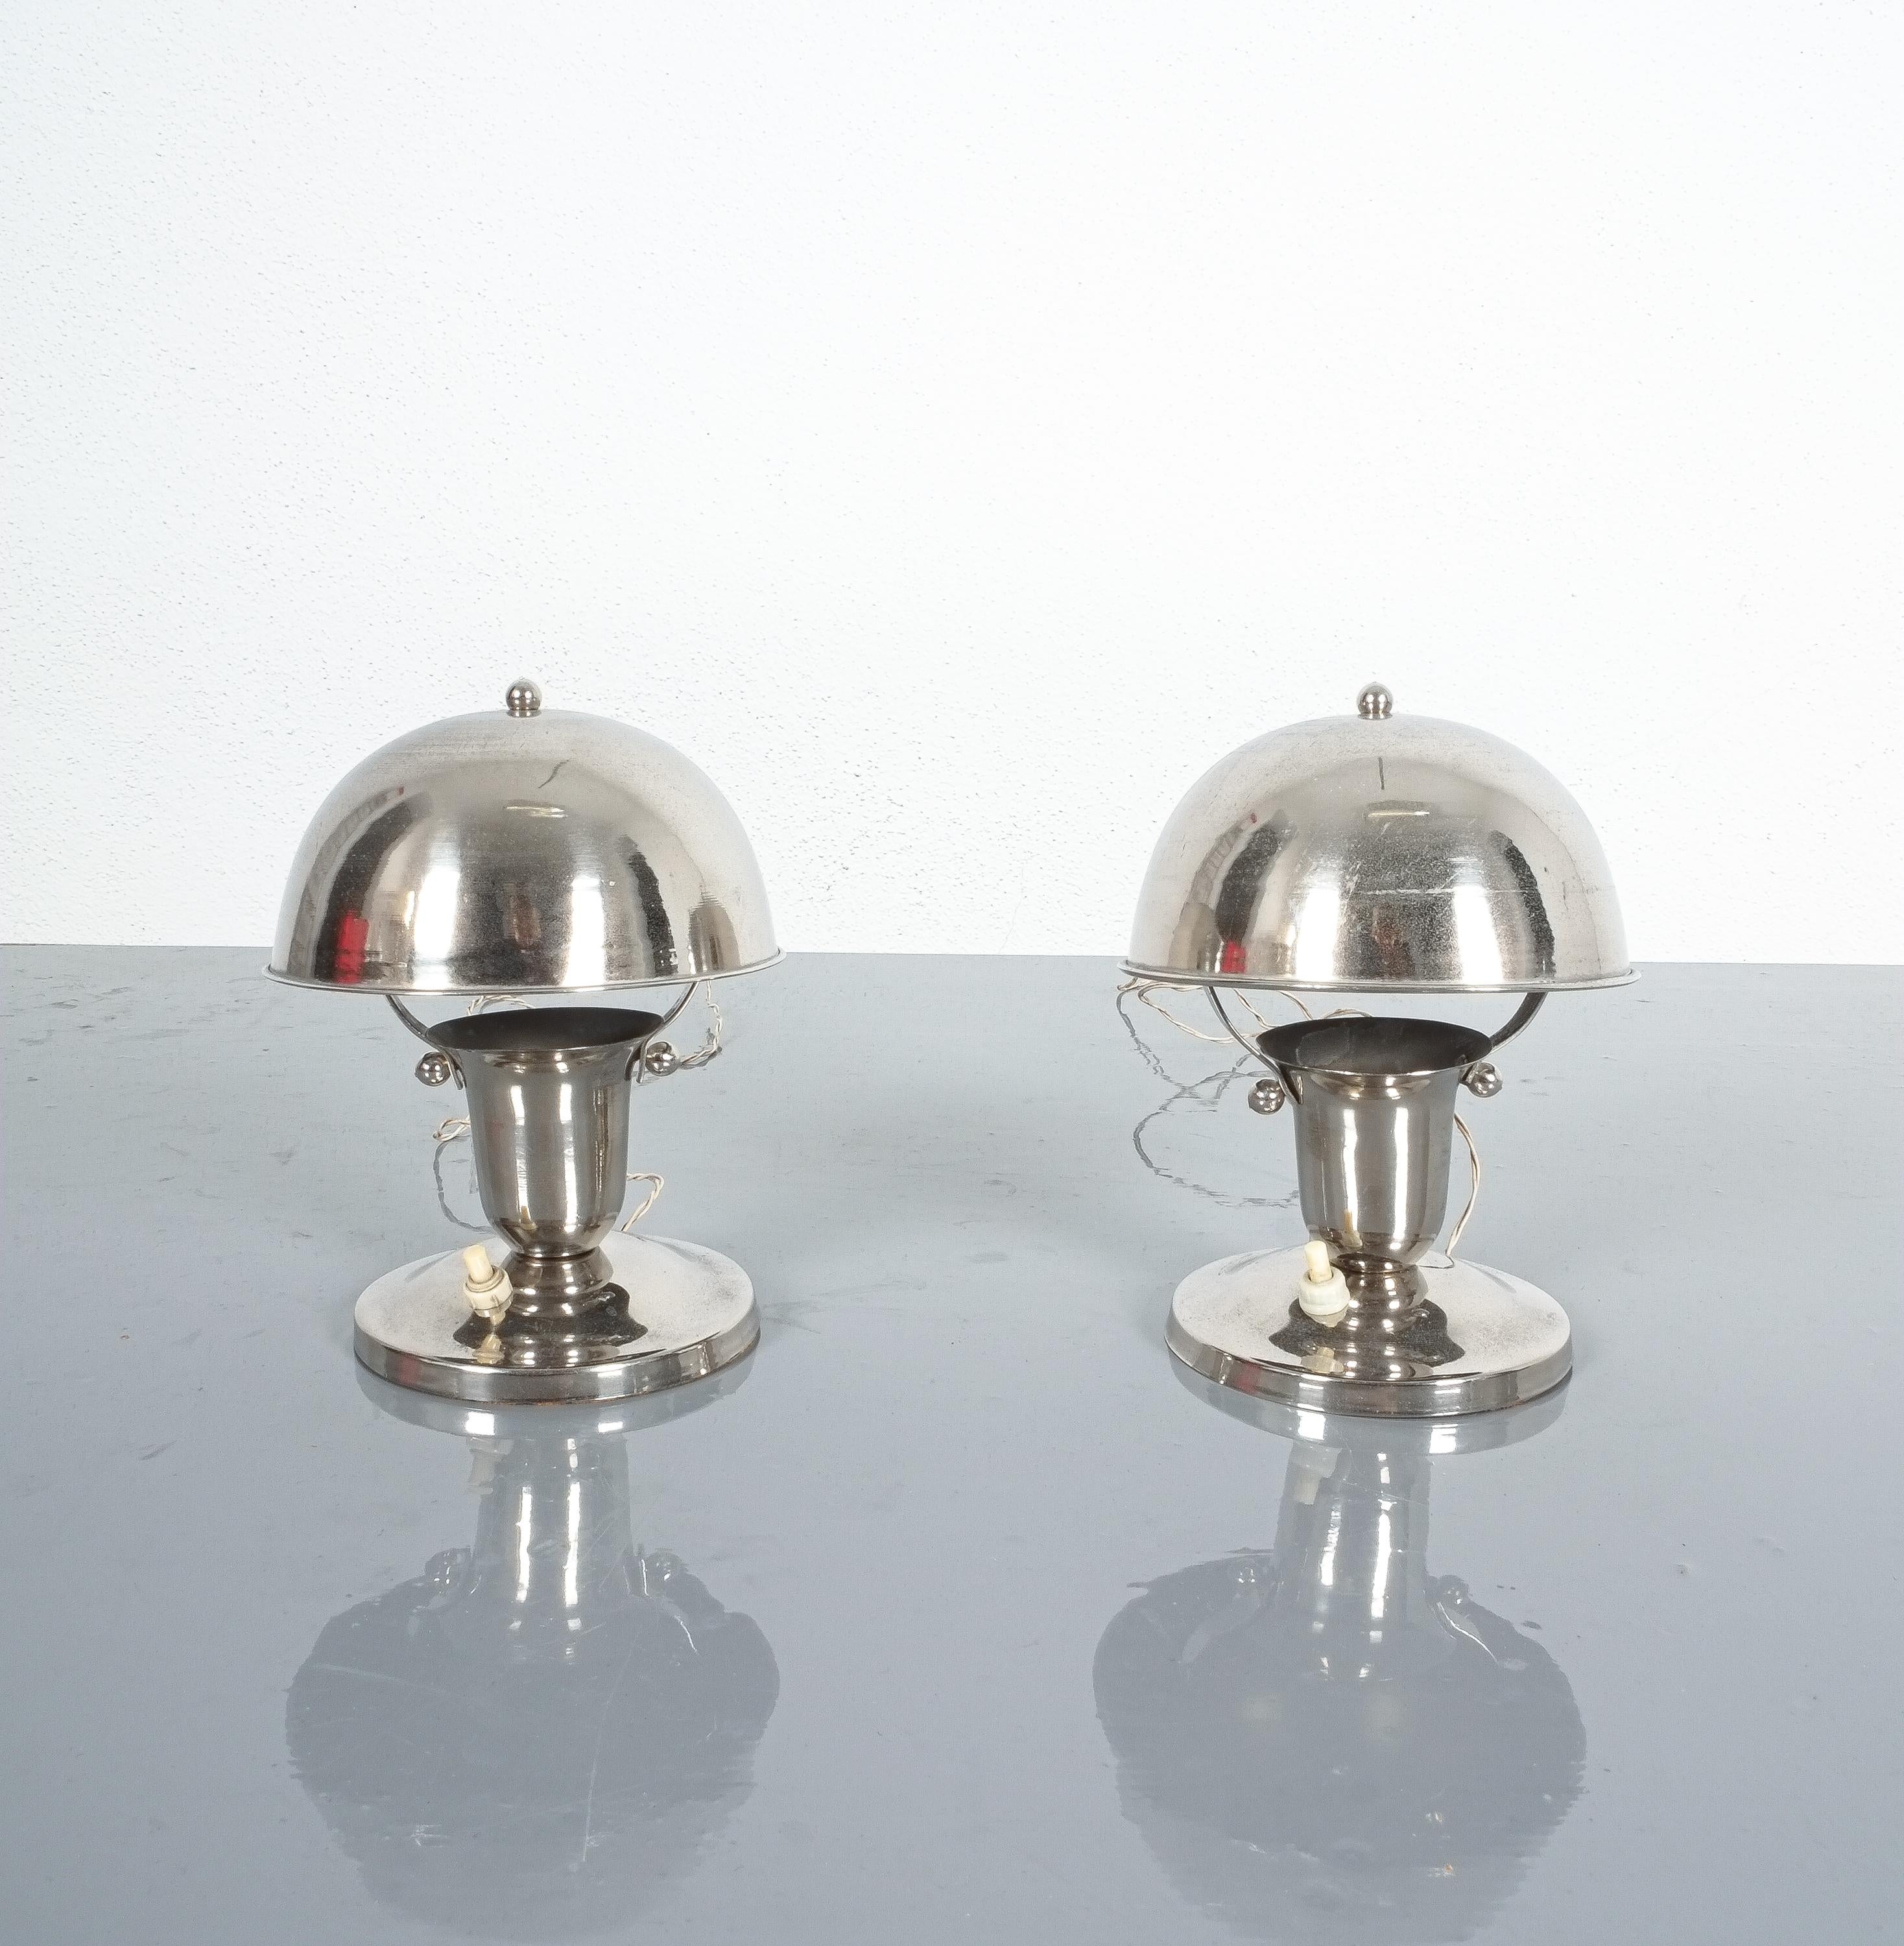 Petit pair of polished nickel desk or bed side table lamps, France, 1940

Nice pair of Art Deco glass table lamps. They have been polished and checked, the original cable and plugs we have left. One bulb with 40W max each per lamp. Priced as a